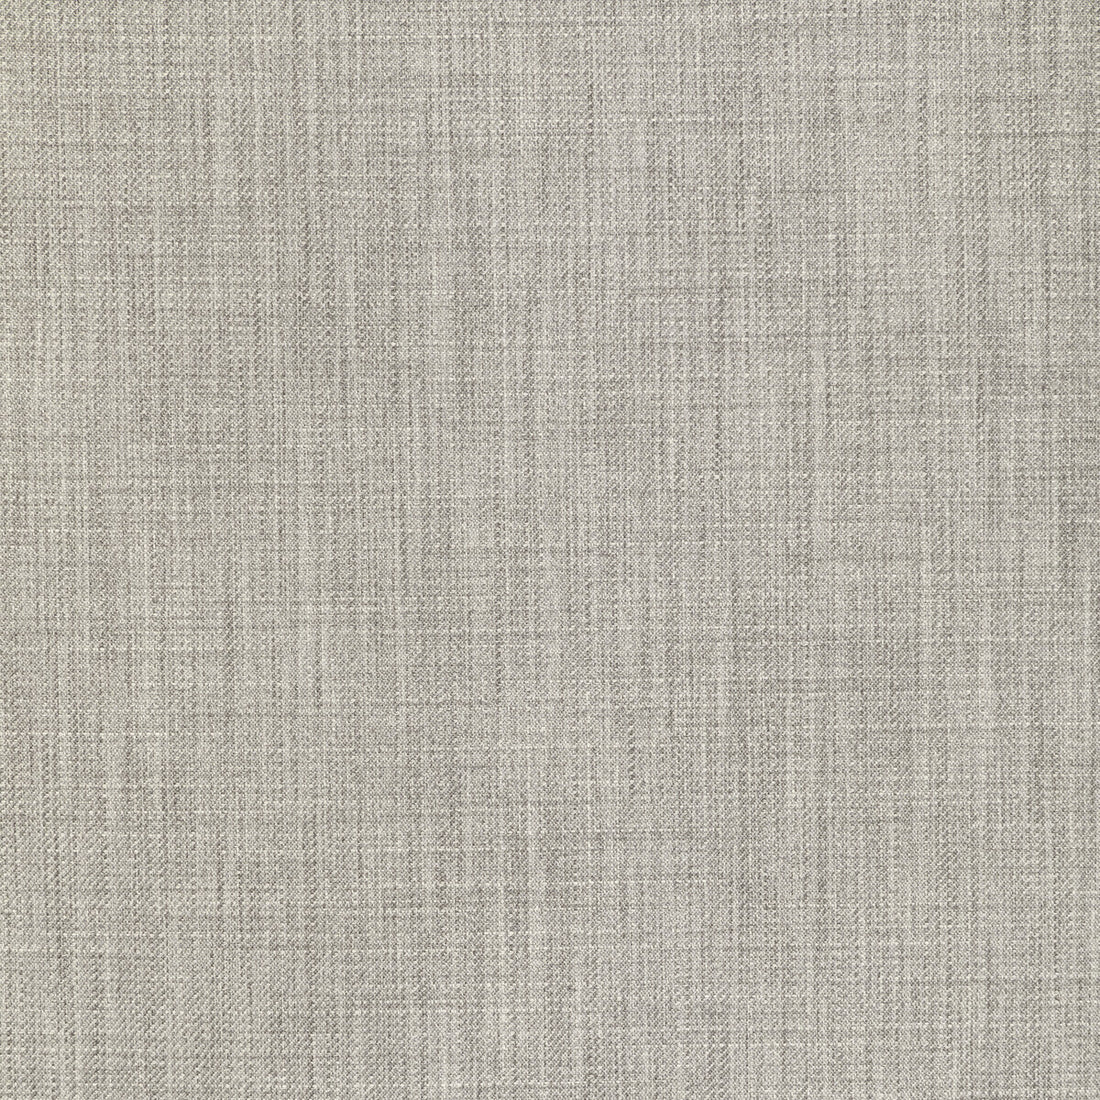 Kravet Smart fabric in 36293-11 color - pattern 36293.11.0 - by Kravet Smart in the Performance Crypton Home collection